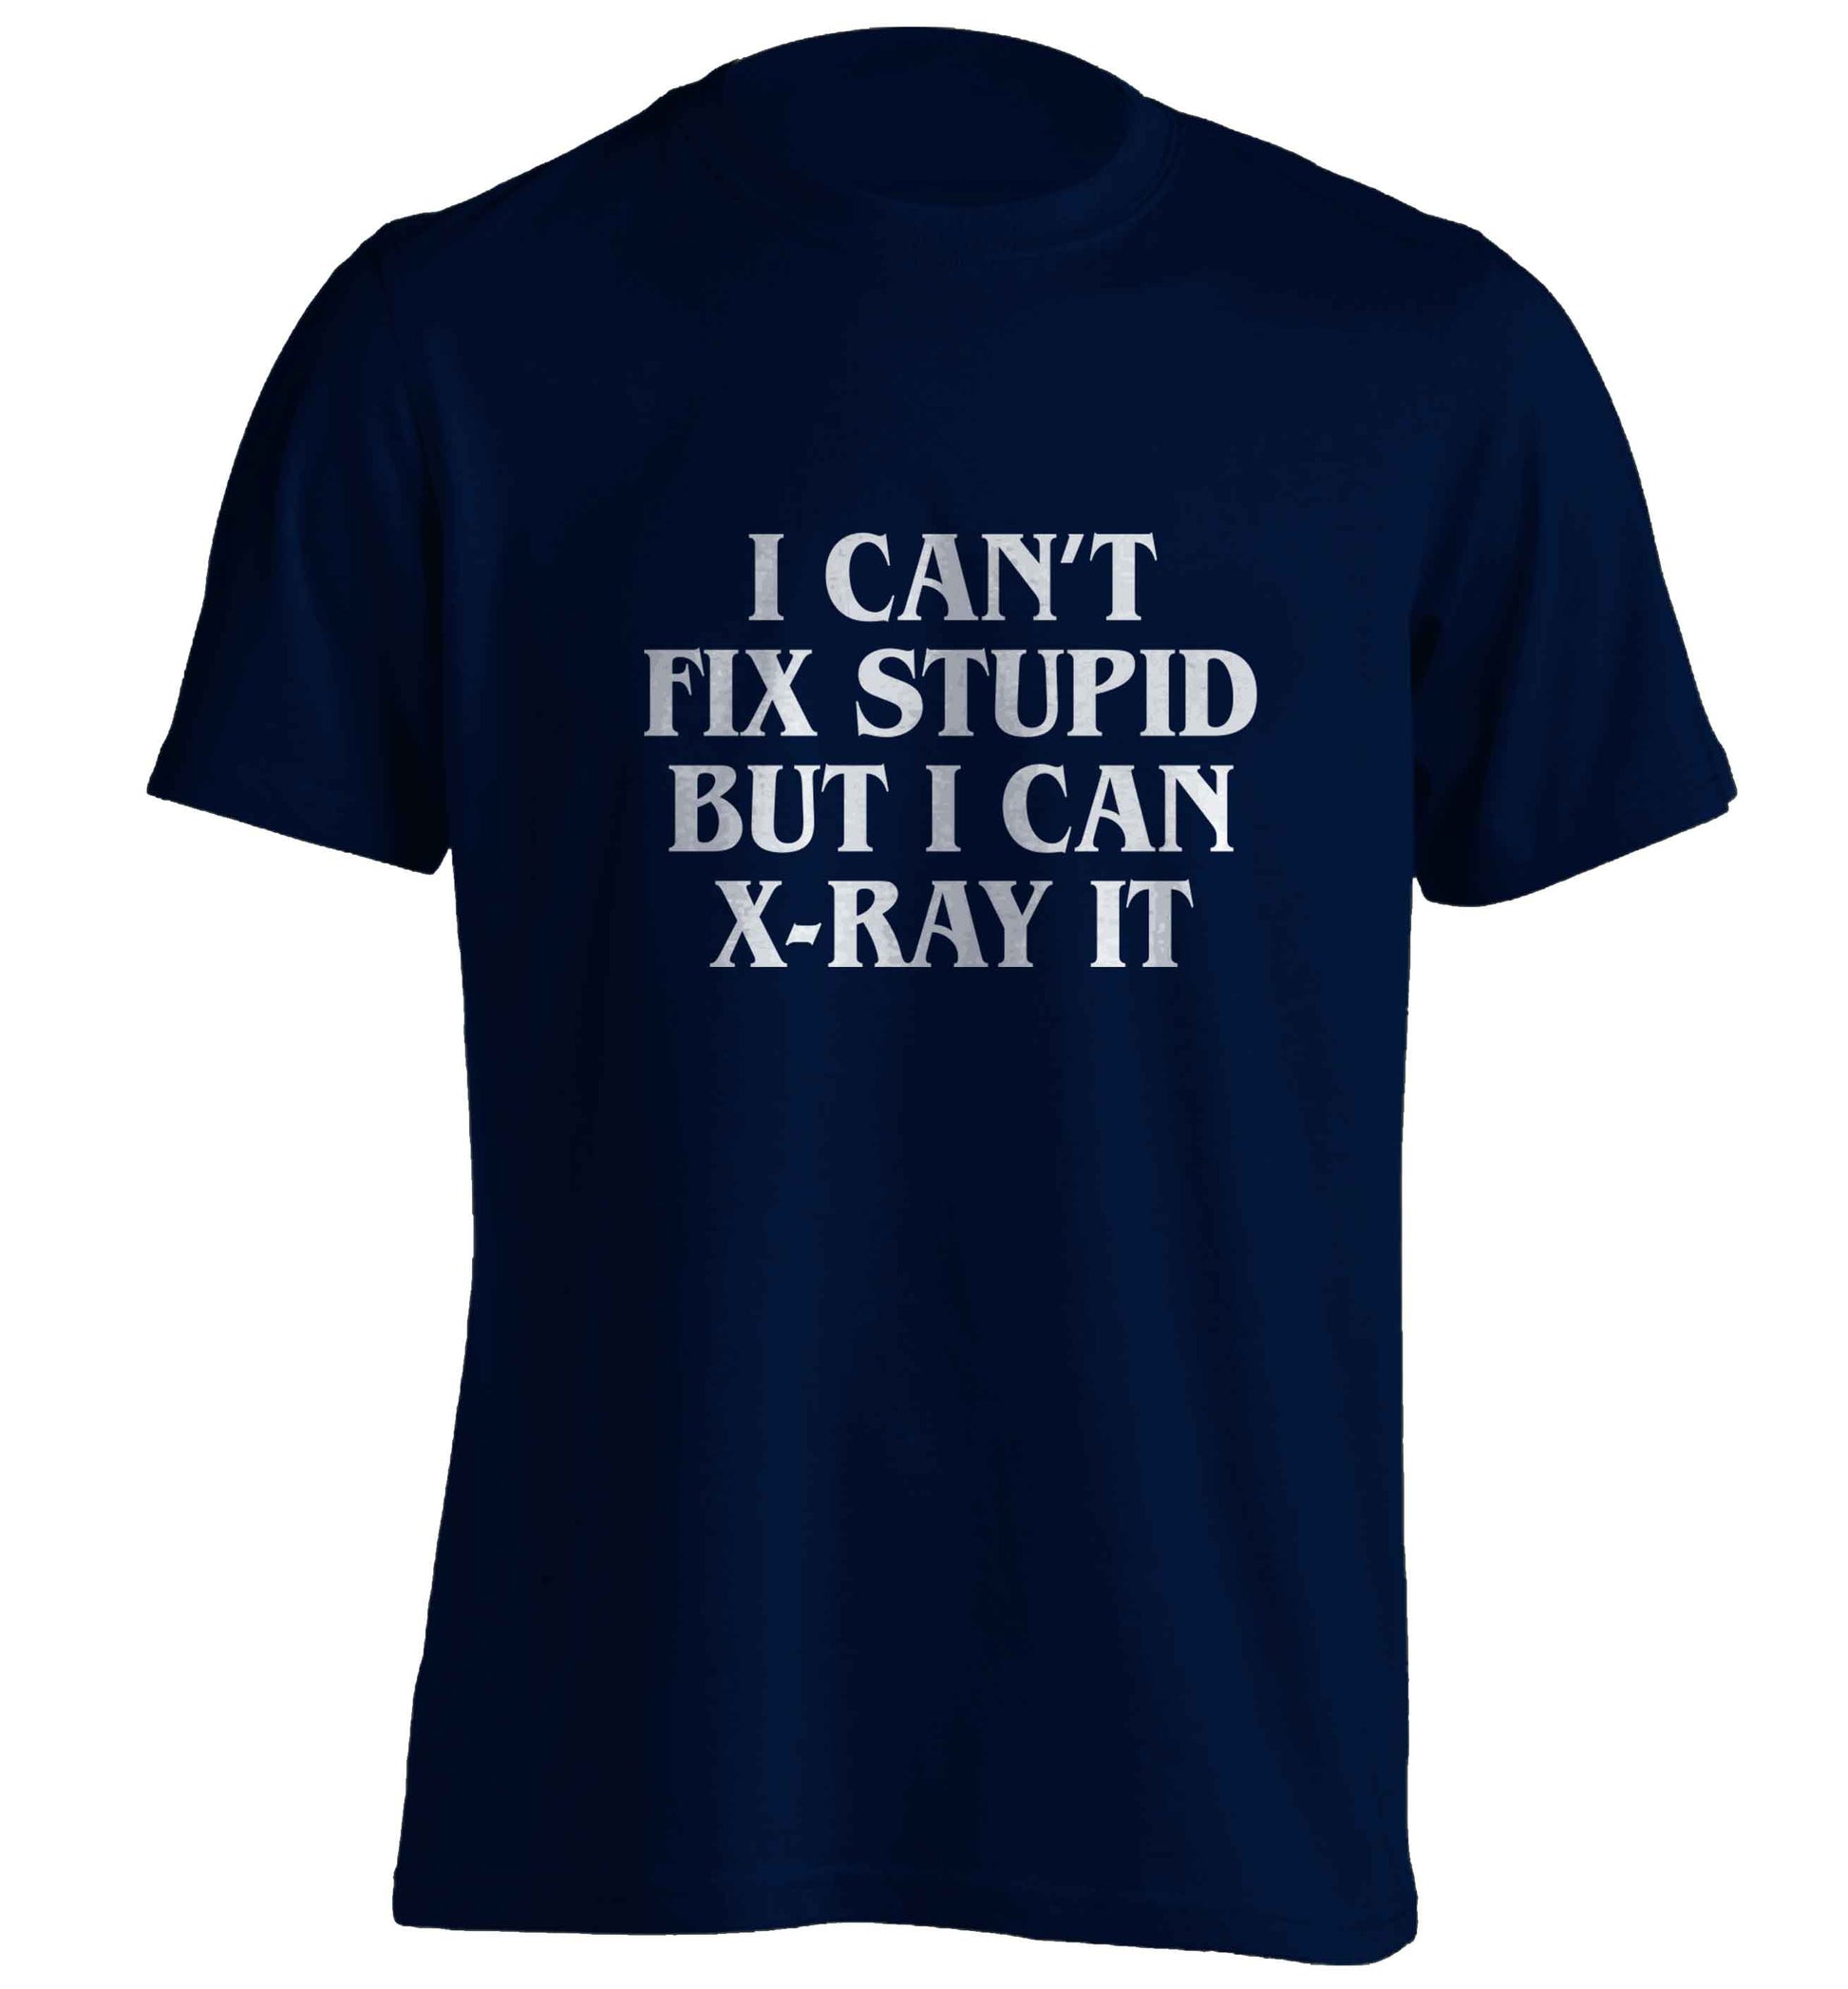 I can't fix stupid but I can X-Ray it adults unisex navy Tshirt 2XL